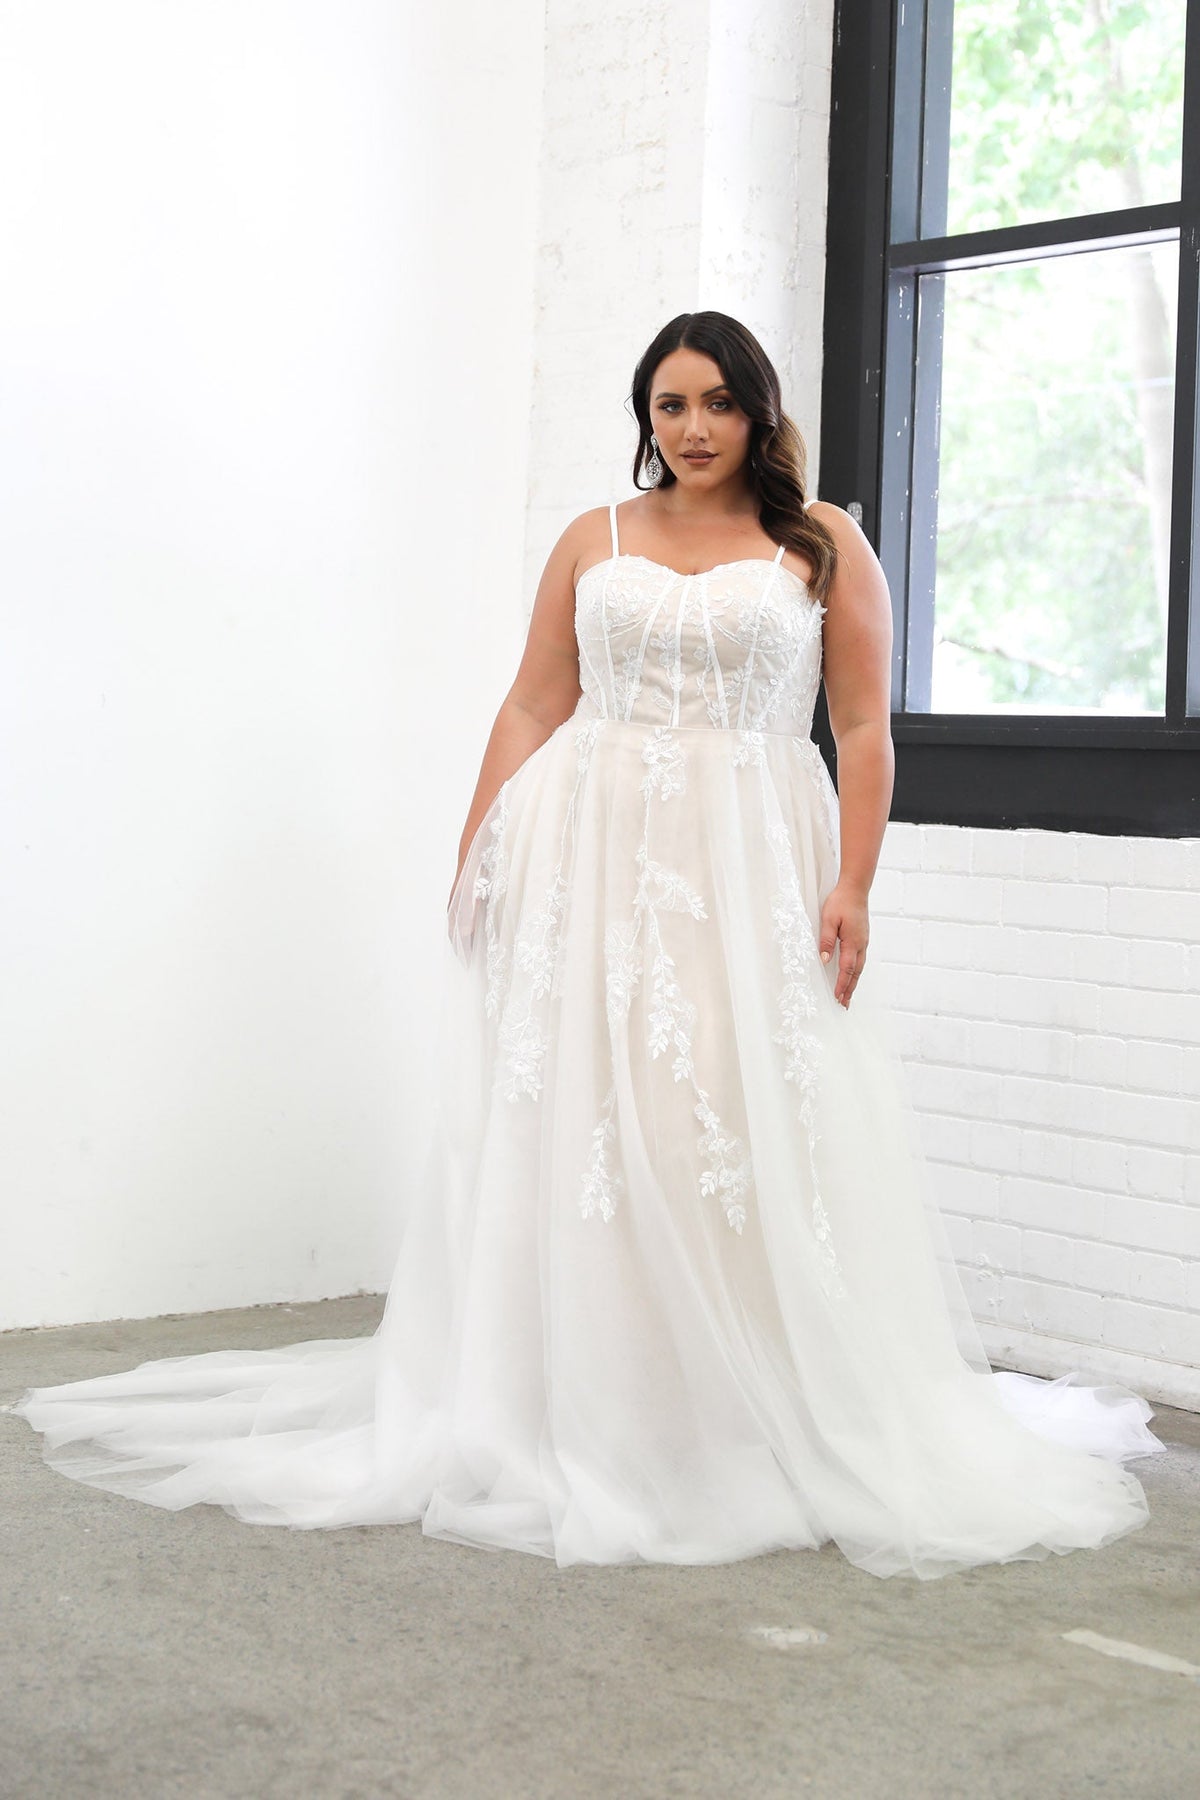 Plus Size Bride in Ivory Off White Lace A-line Wedding Gown